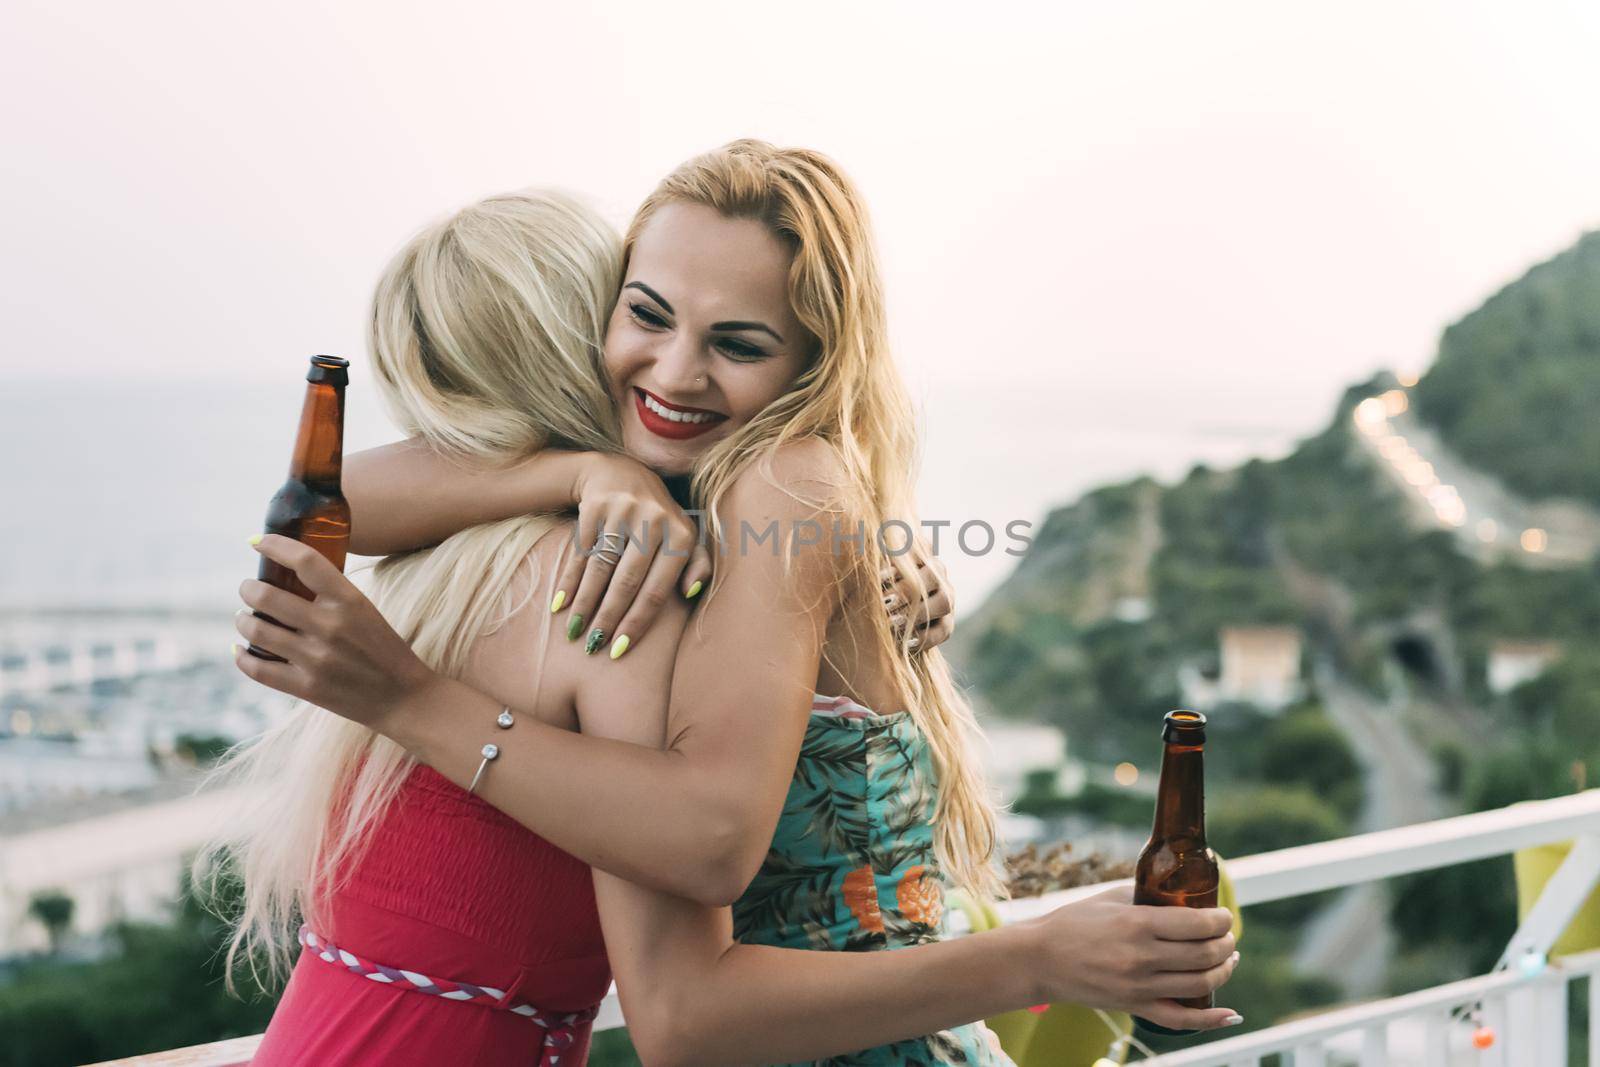 carefree young girls with beers hugging and having fun at a private party on the outdoor terrace, leisure happiness and friendship concept, with copy space for text